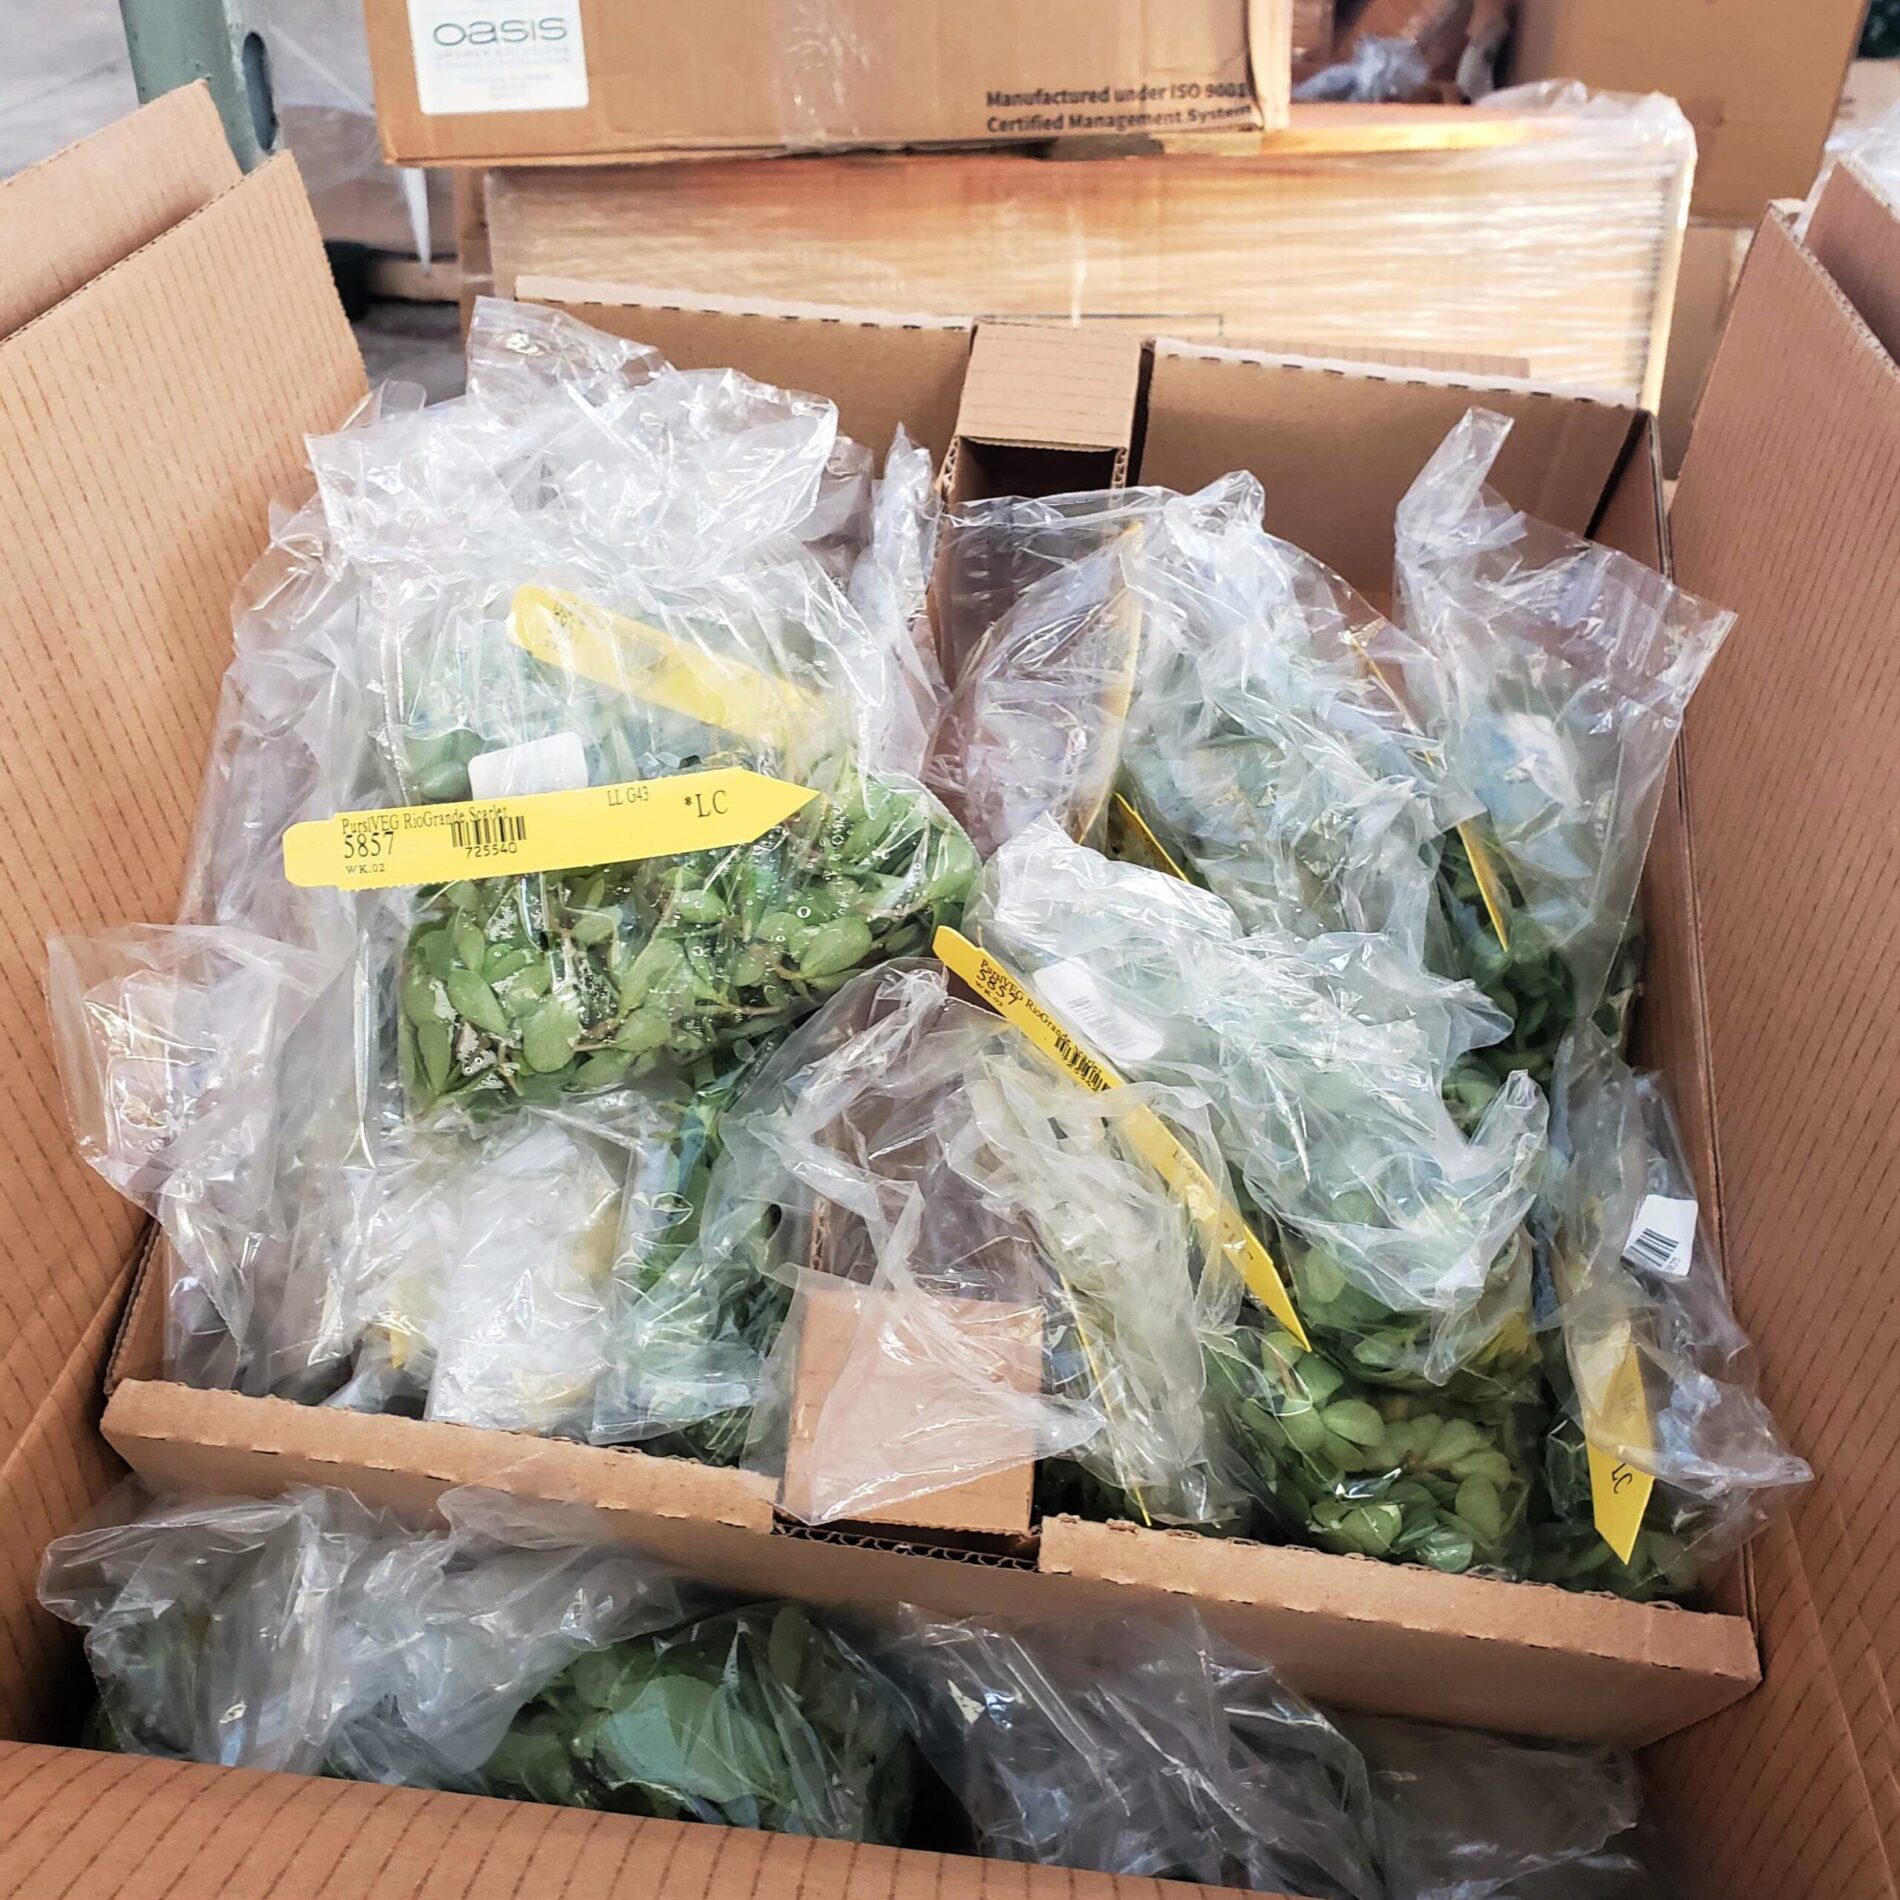 2022 Greenstreet Growers Wholesale Landscape Blog What's Growing On February